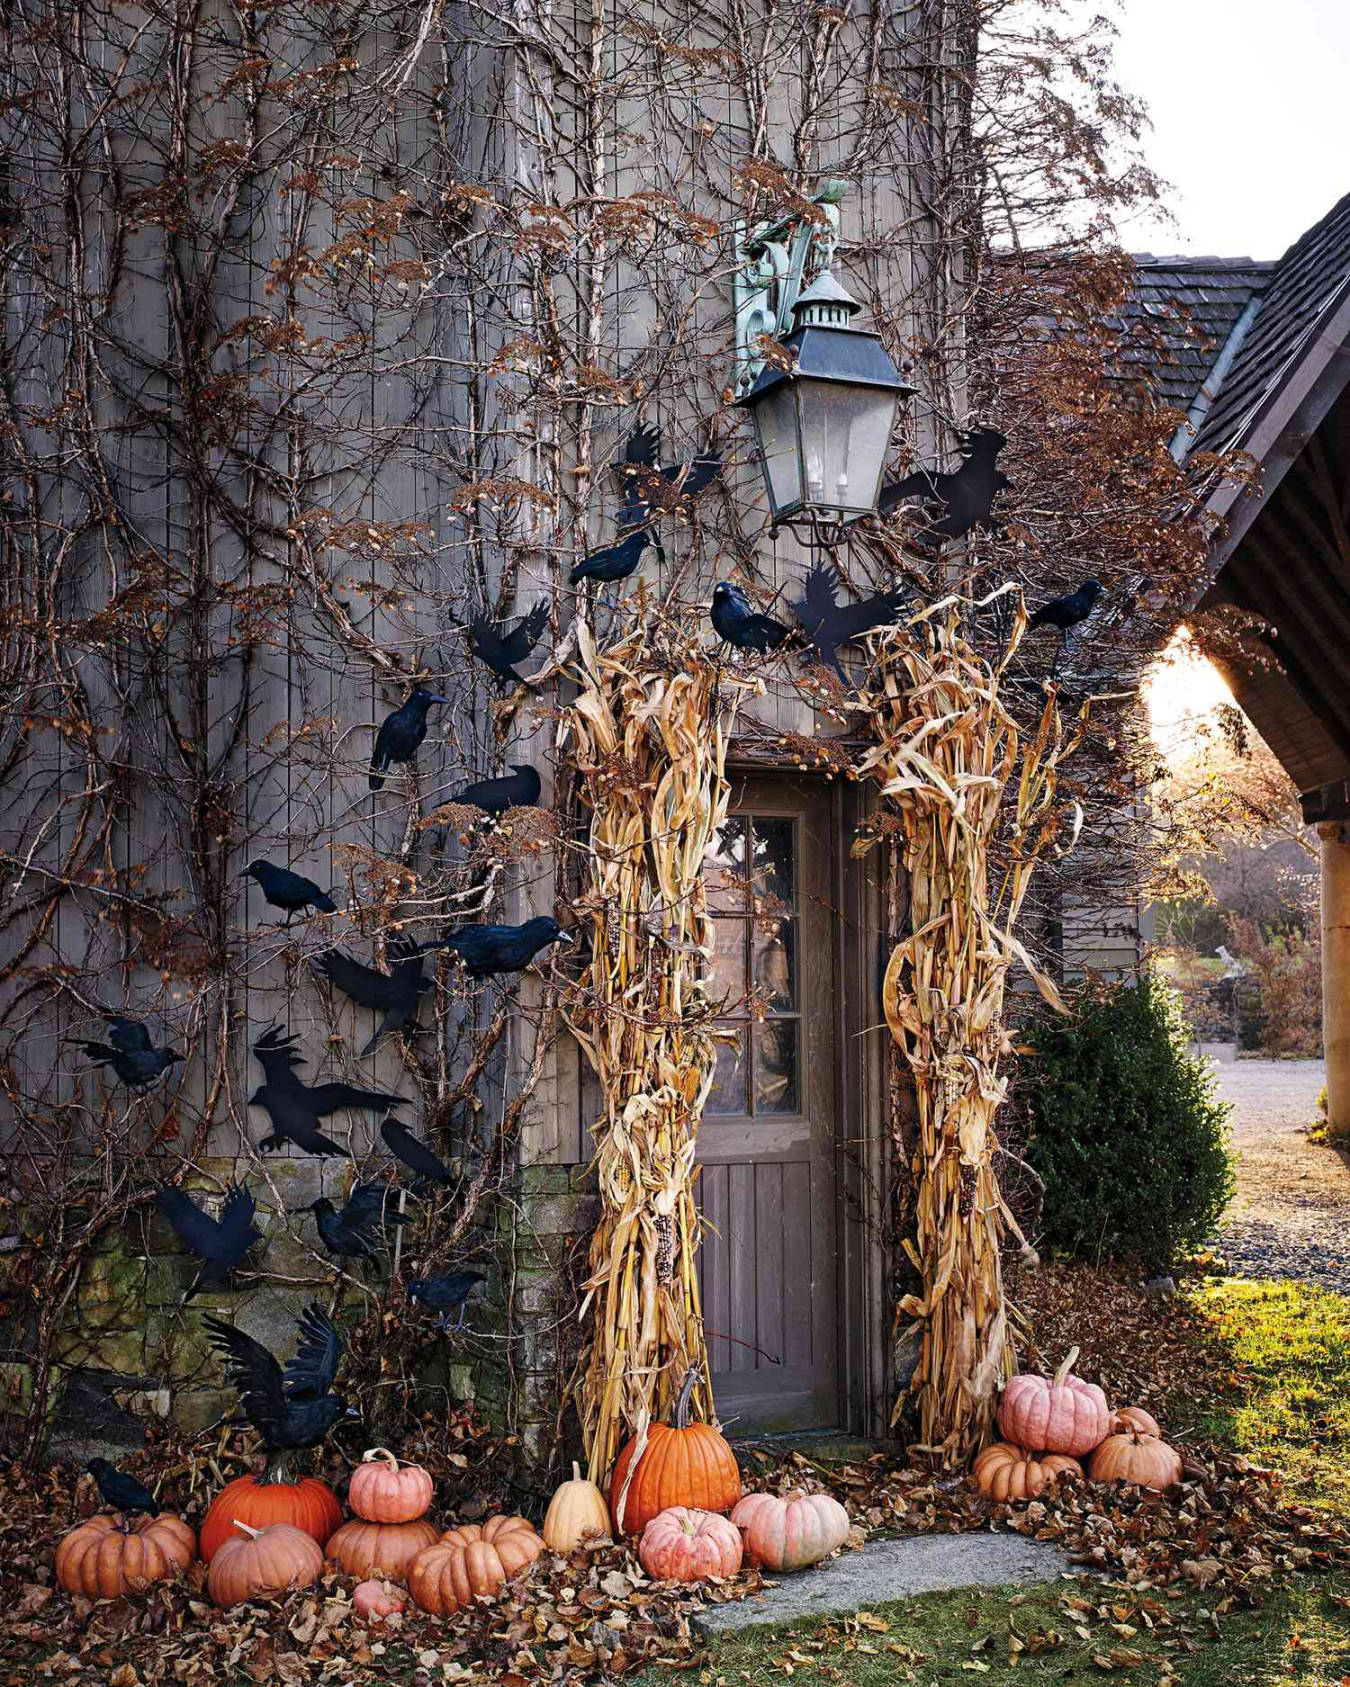 Best Outdoor Halloween Decoration Ideas: Projects and How-Tos